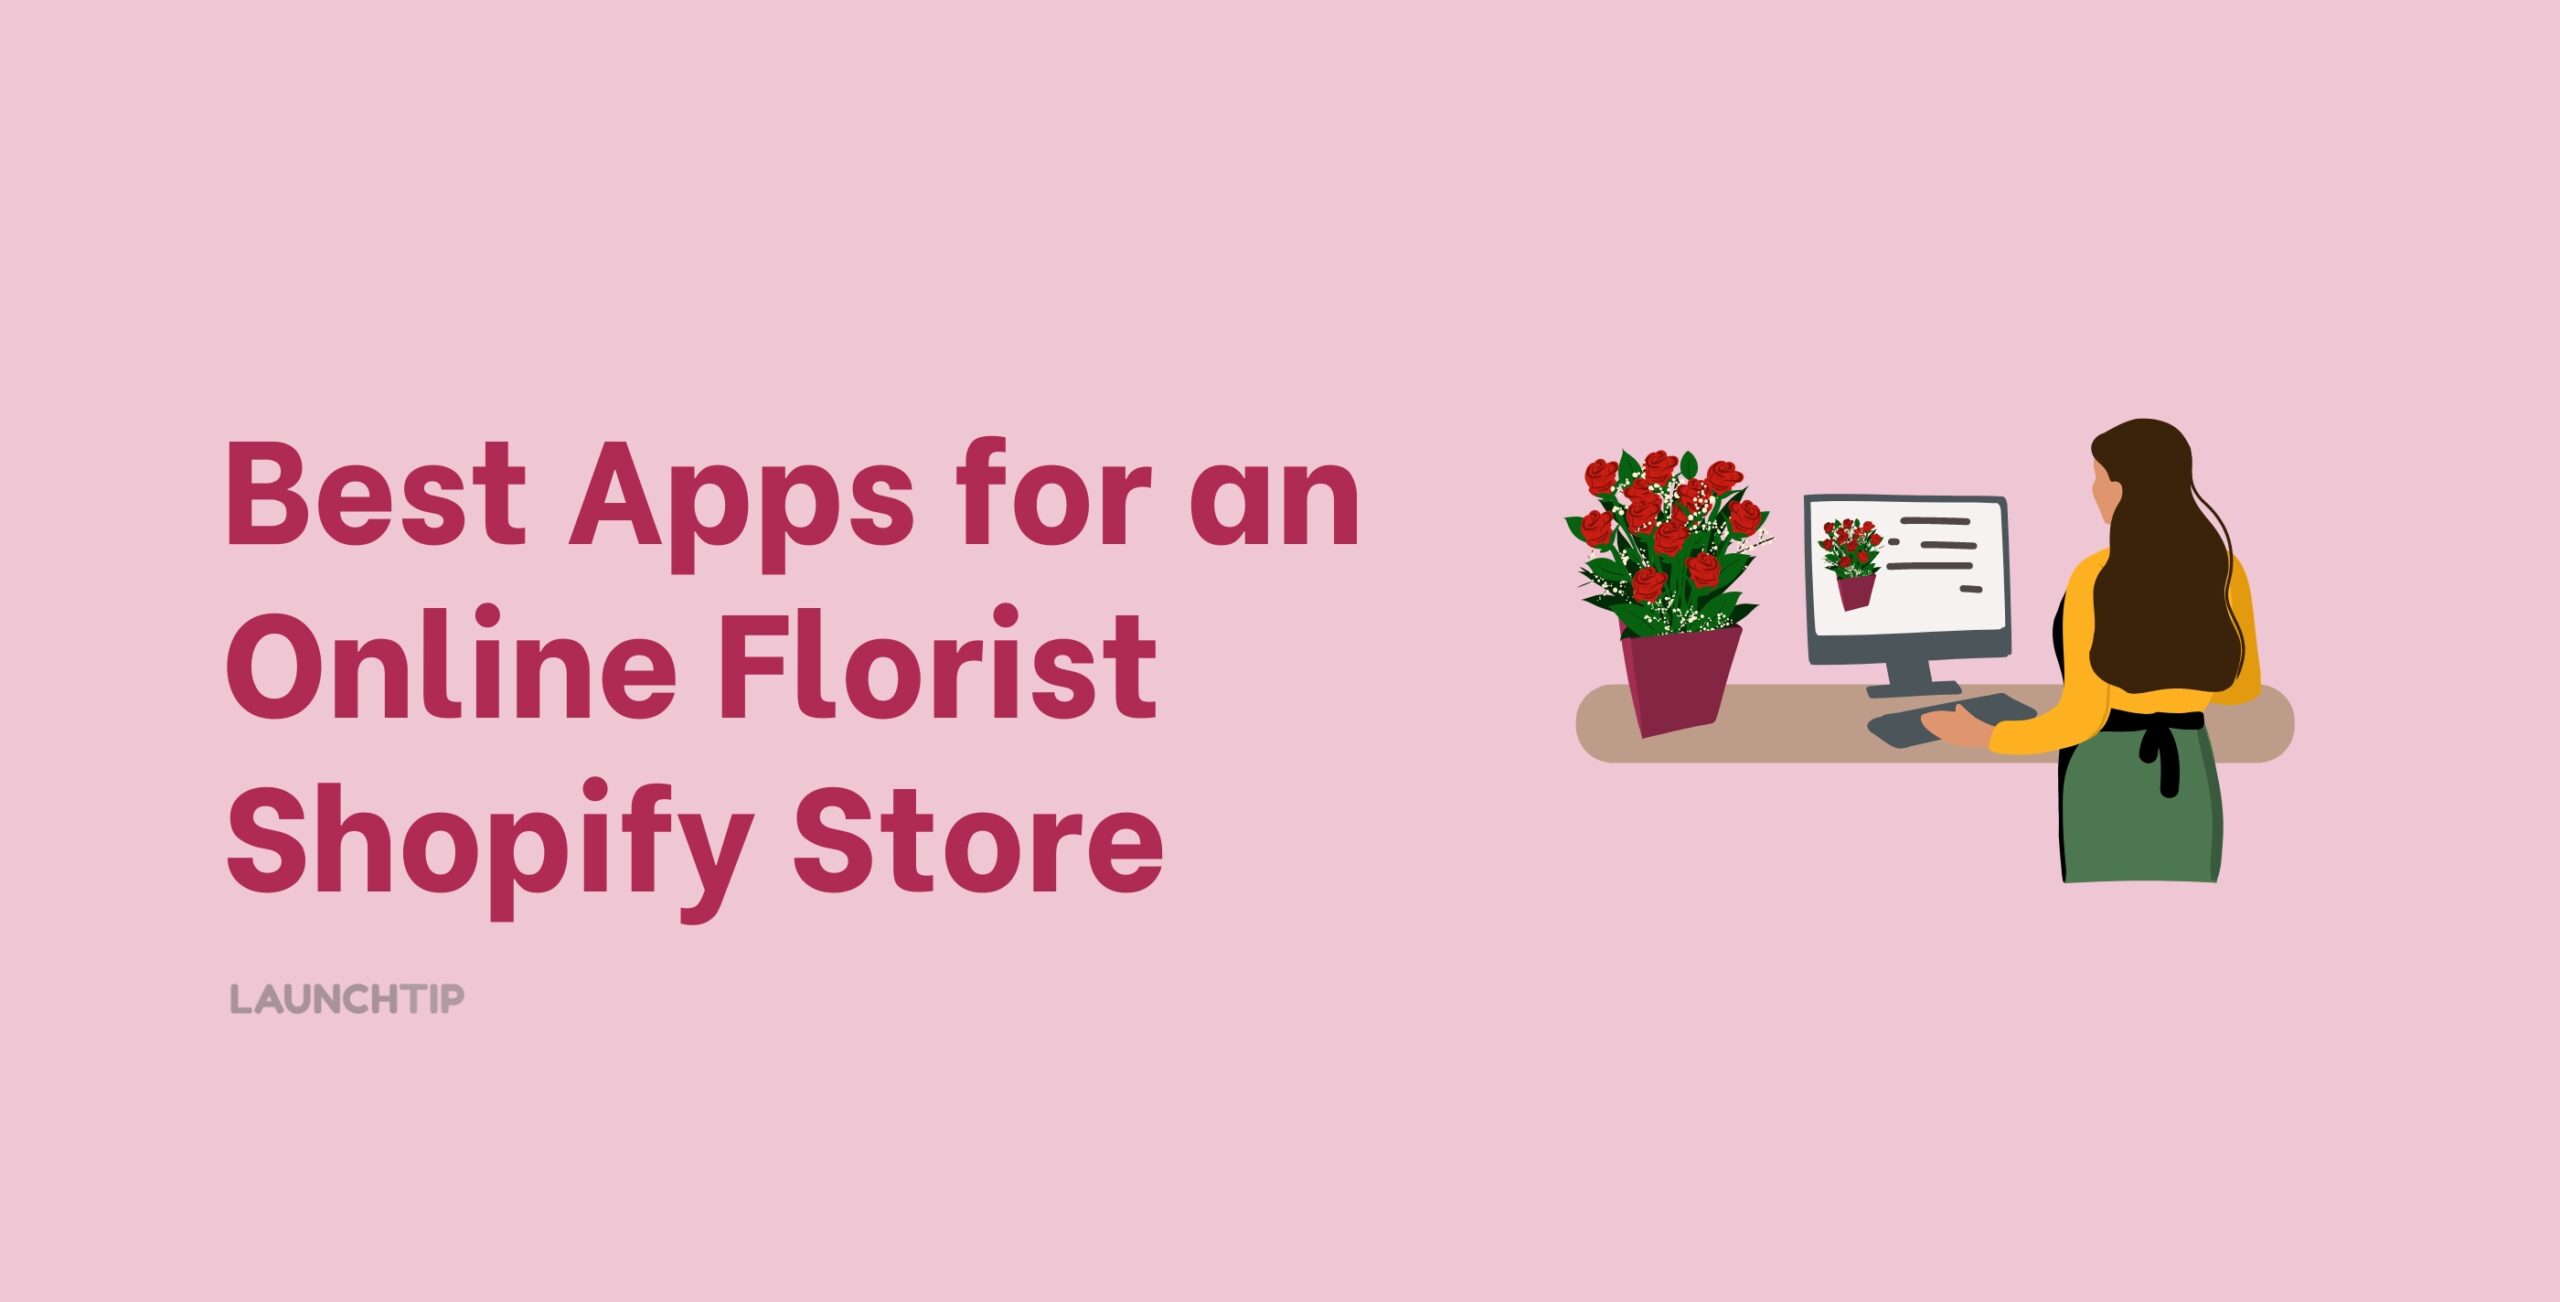 Best apps for an online florist Shopify store